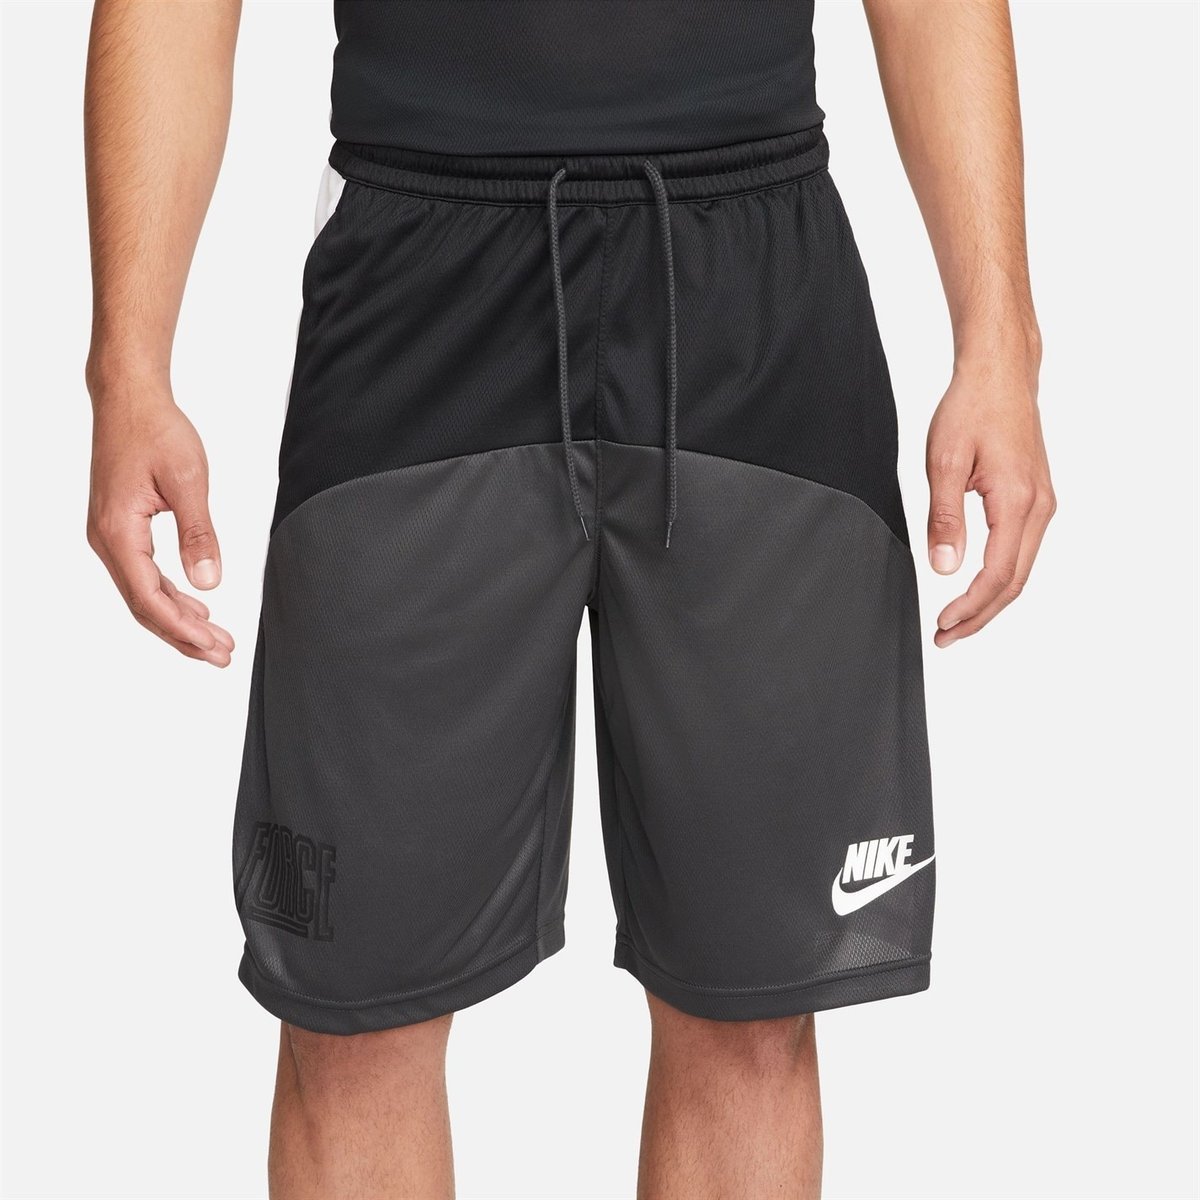 Nike Basketball One Dri-Fit 7inch Shorts in Navy